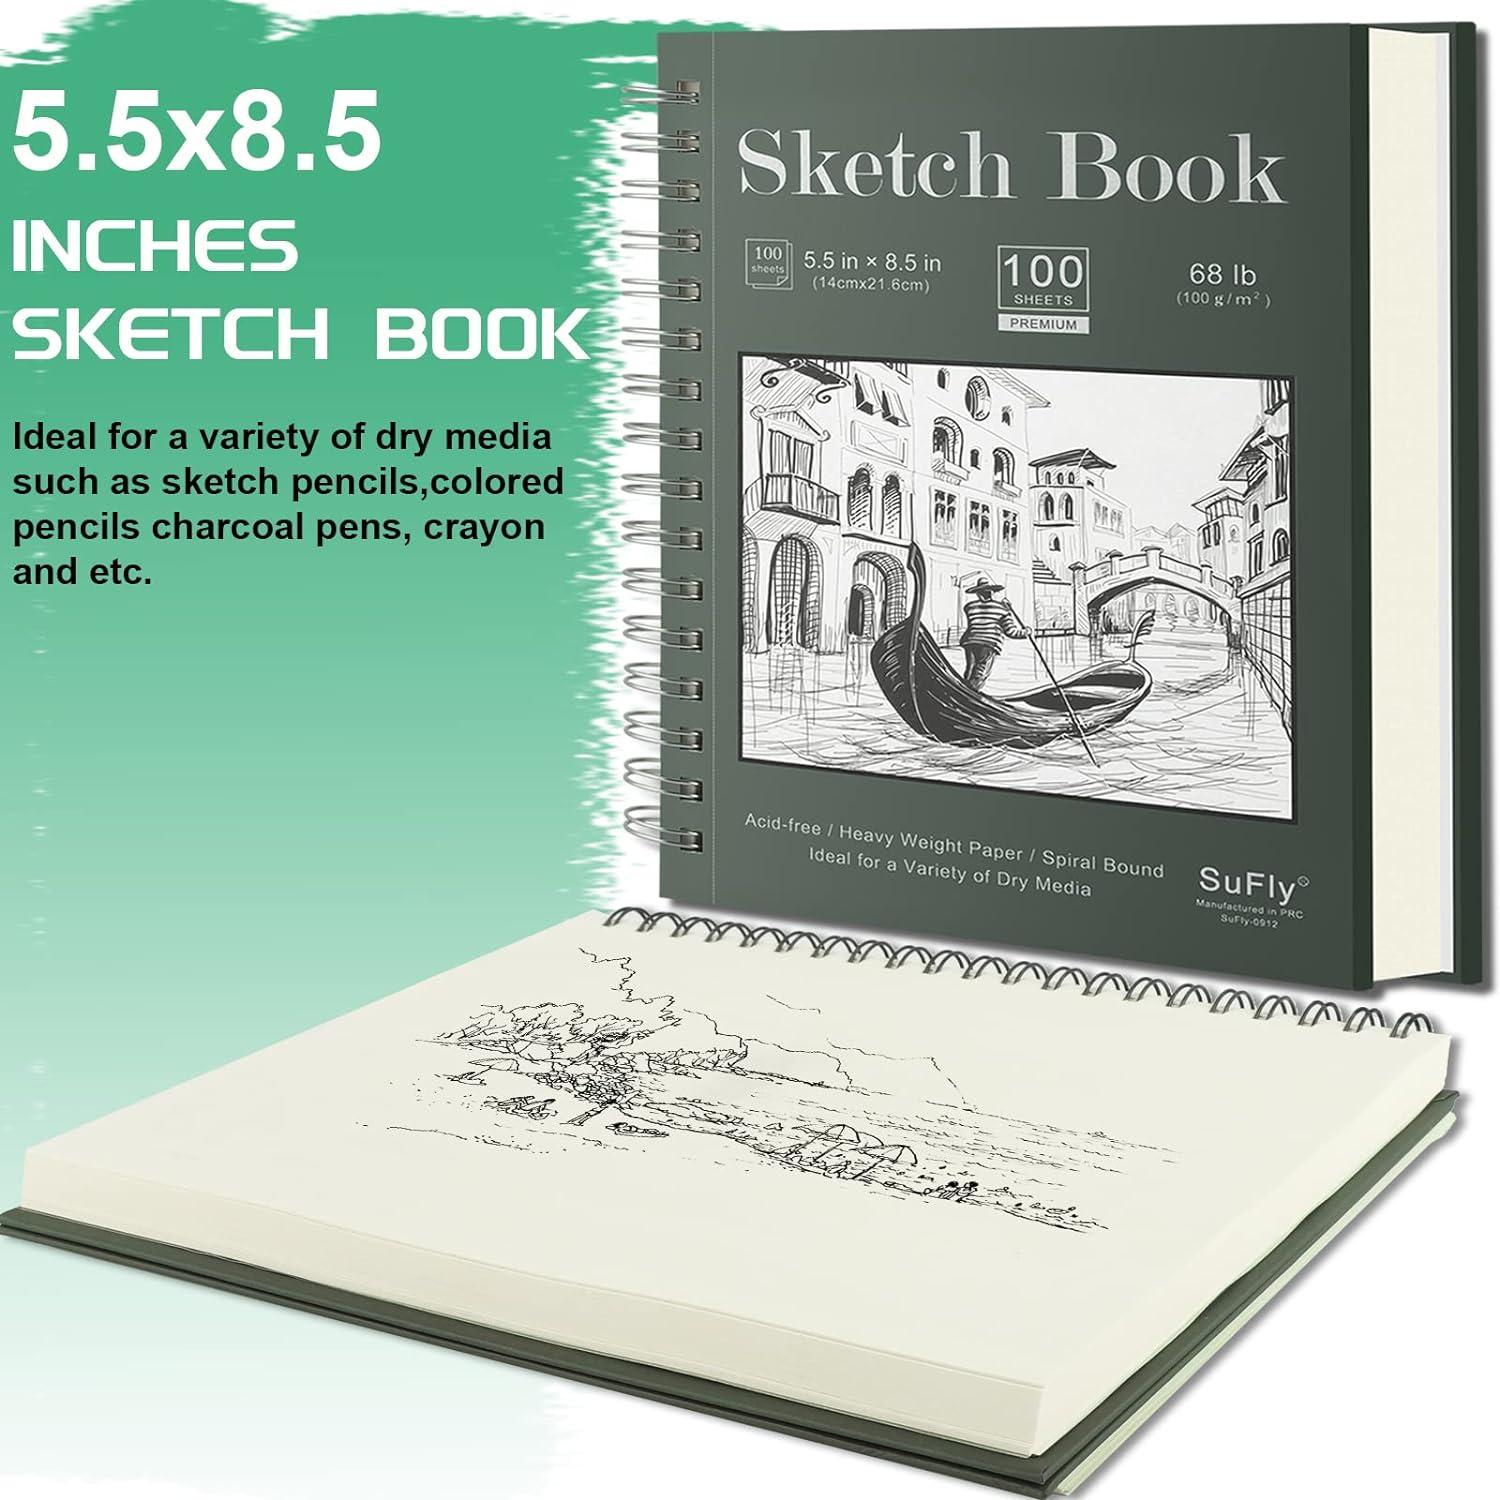 Hardcover Sketch Pad, Acid Free Sketchbooks For Drawing, Painting And  Sketching - Buy Hardcover Sketch Pad, Acid Free Sketchbooks For Drawing,  Painting And Sketching Product on